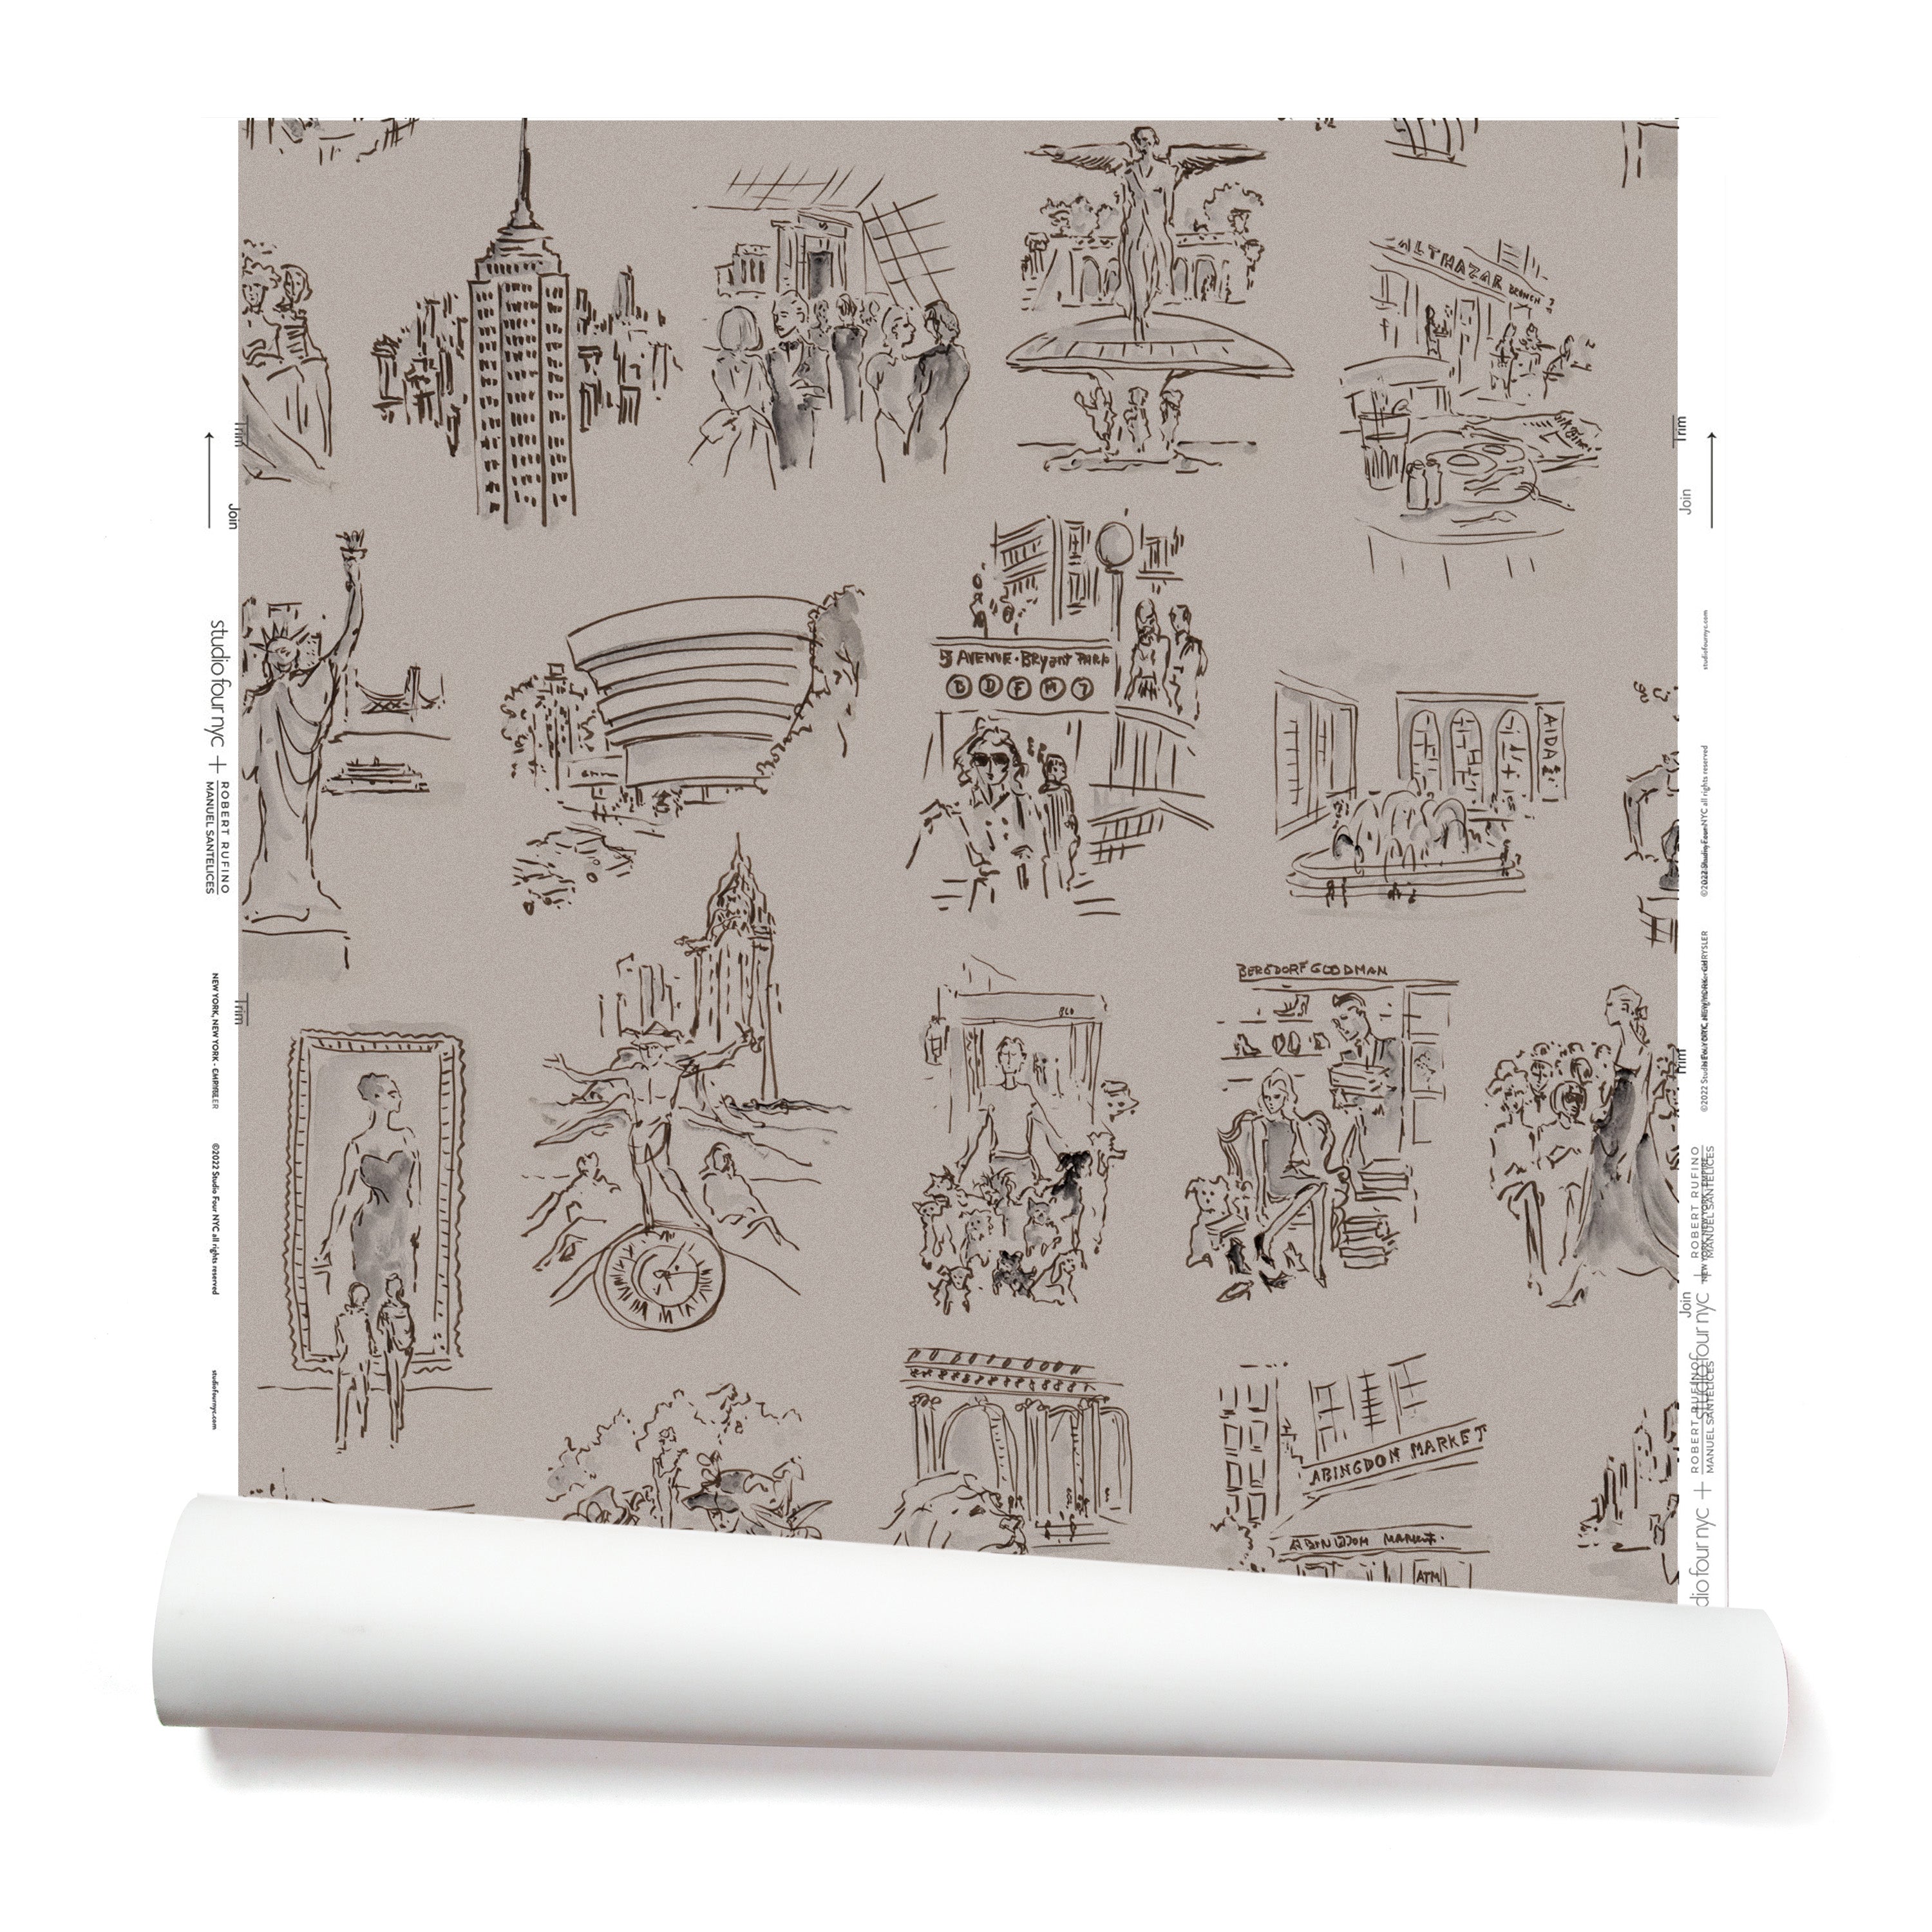 Partially unrolled wallpaper with black hand-drawn illustrations of New York City landmarks on a tan background.